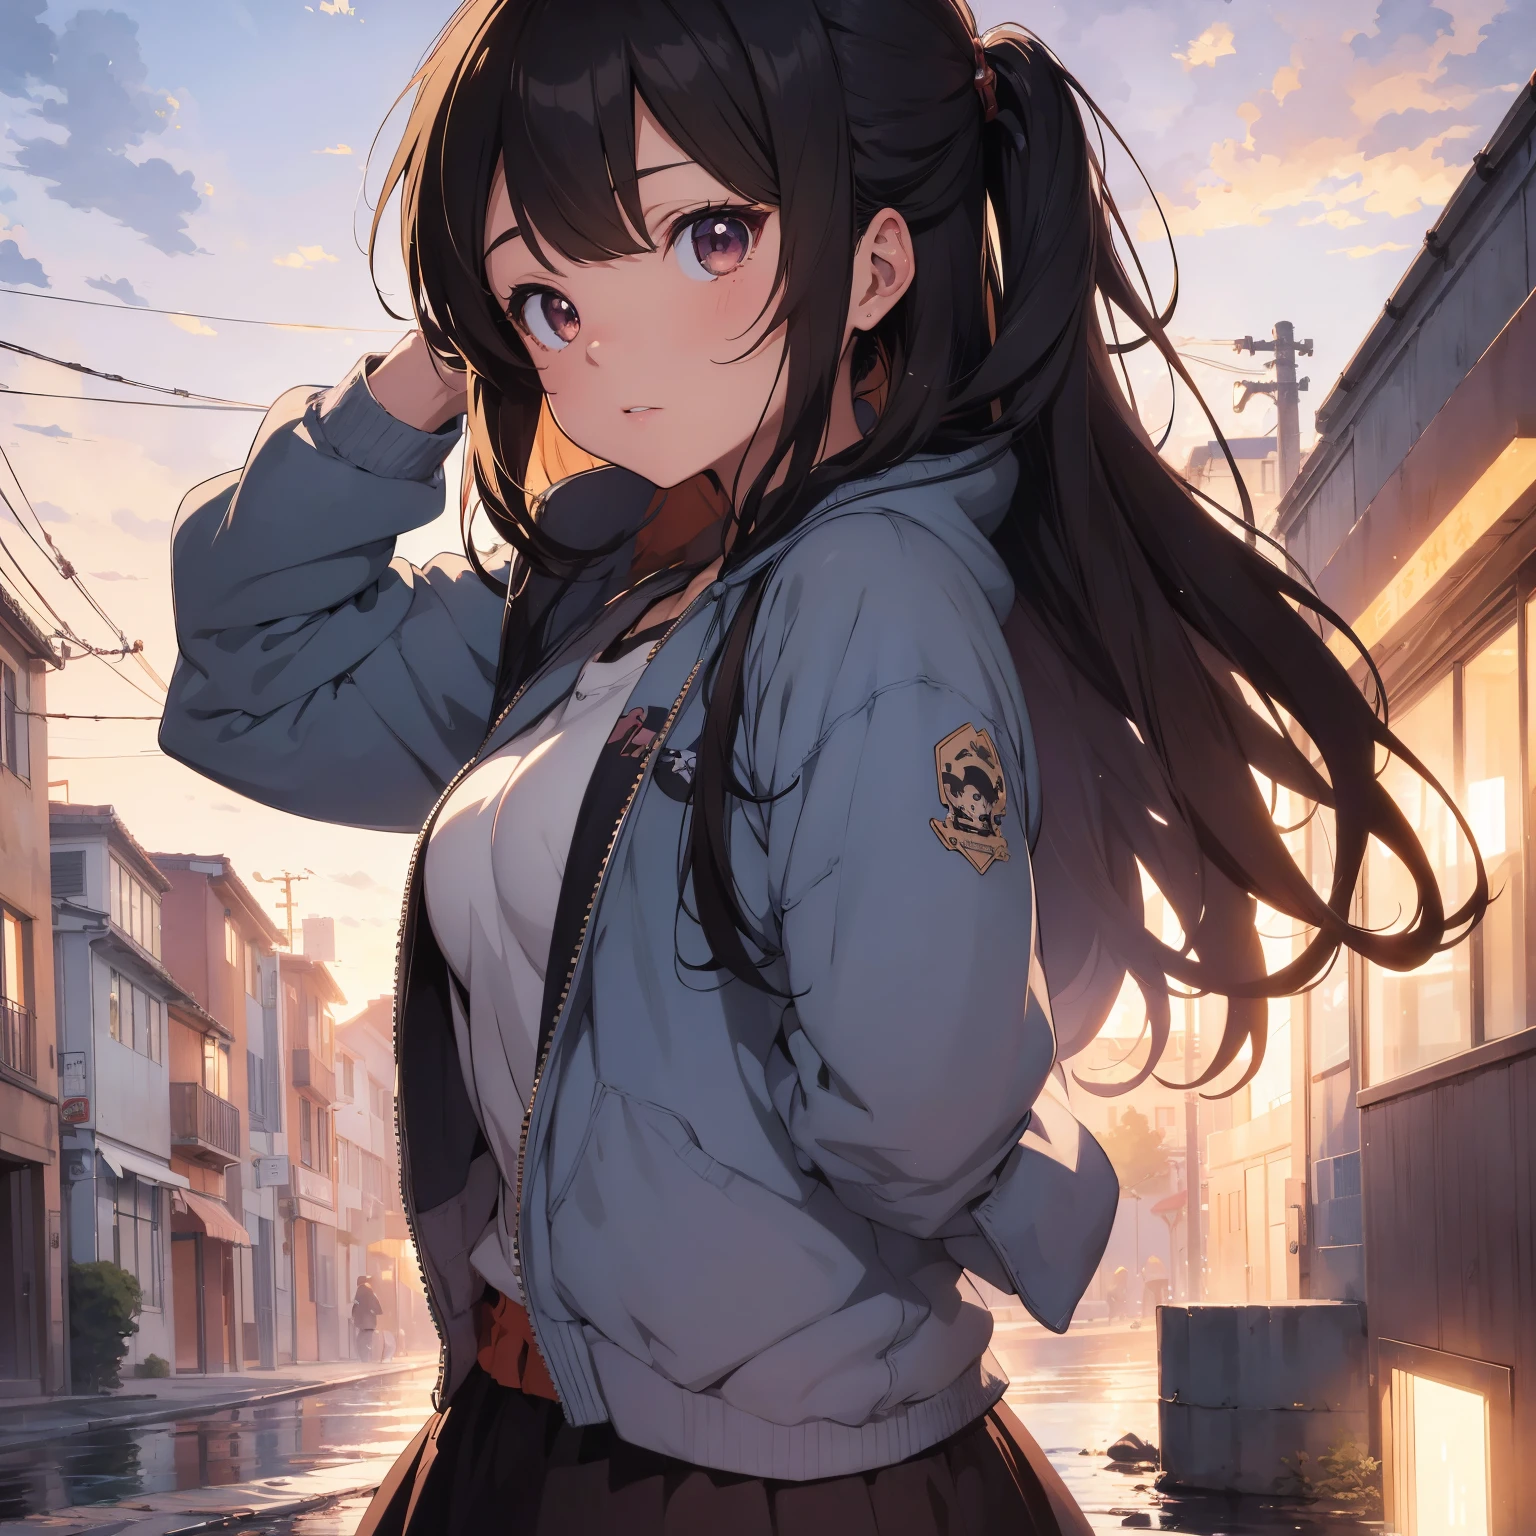 Masterpiece, top quality, 4K, ultra HD, Anime girl with short brown hair, wearing a white university jacket, posing for a photo, Art in the style of Guweiz, detailed digital anime art, Anime-style digital art, Anime-style art, Guweiz, Anime-style illustration, Clean and detailed anime art, Digital anime illustration, Detailed anime character art, Detailed portrait of the anime girl, Anime skull portrait woman, Detailed anime art.